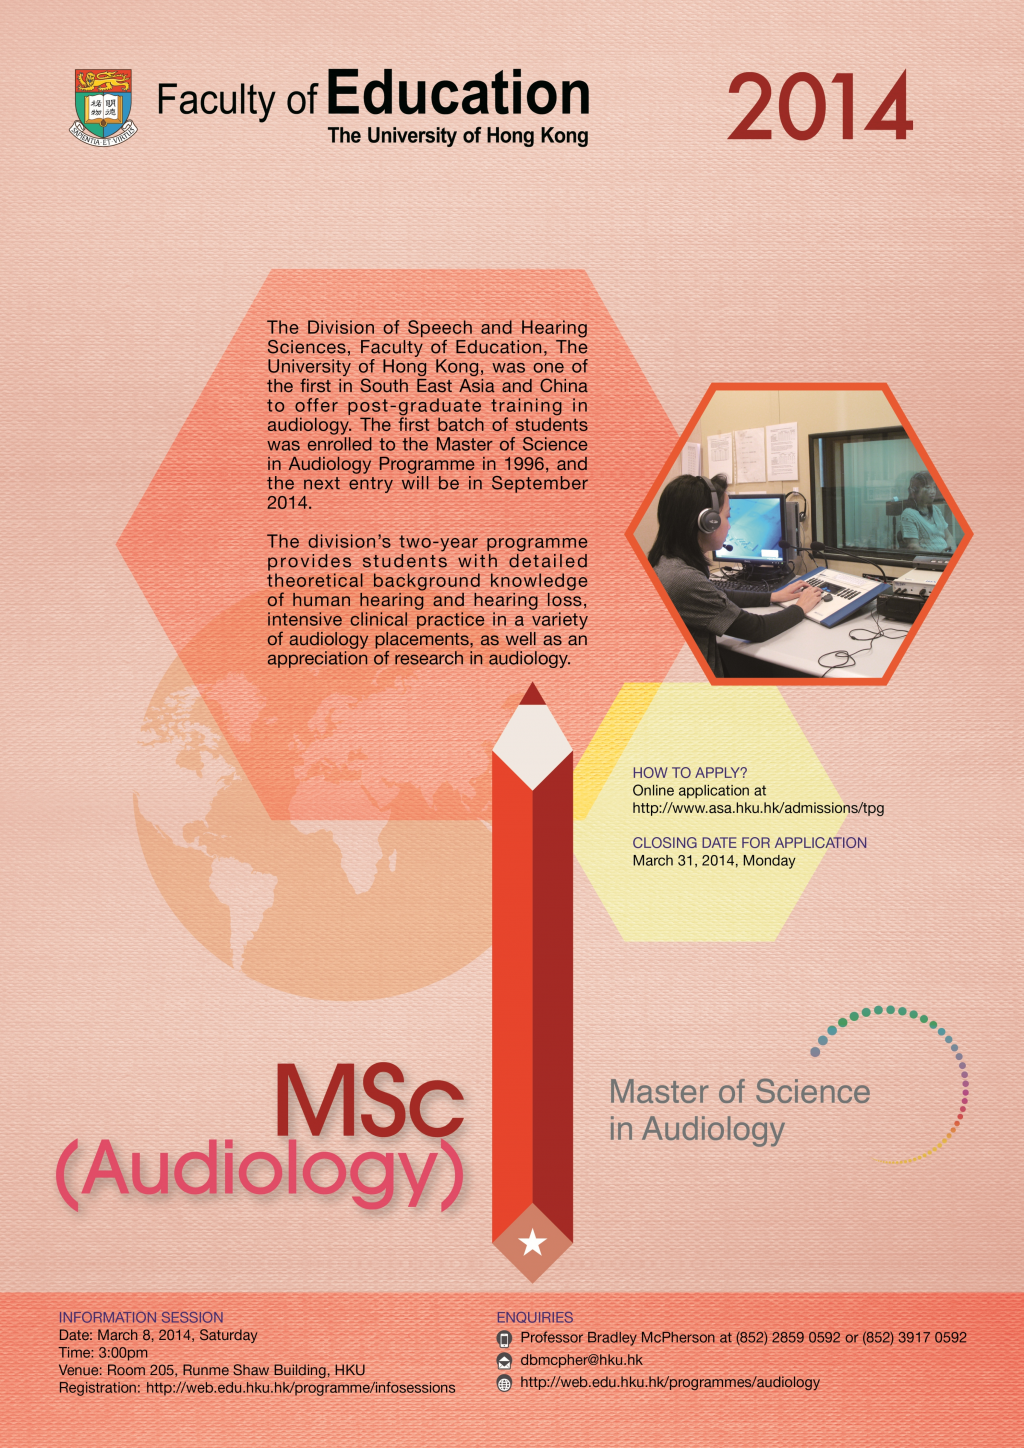 Information Session for Master of Science in Audiology (MSc[Audiology]) 